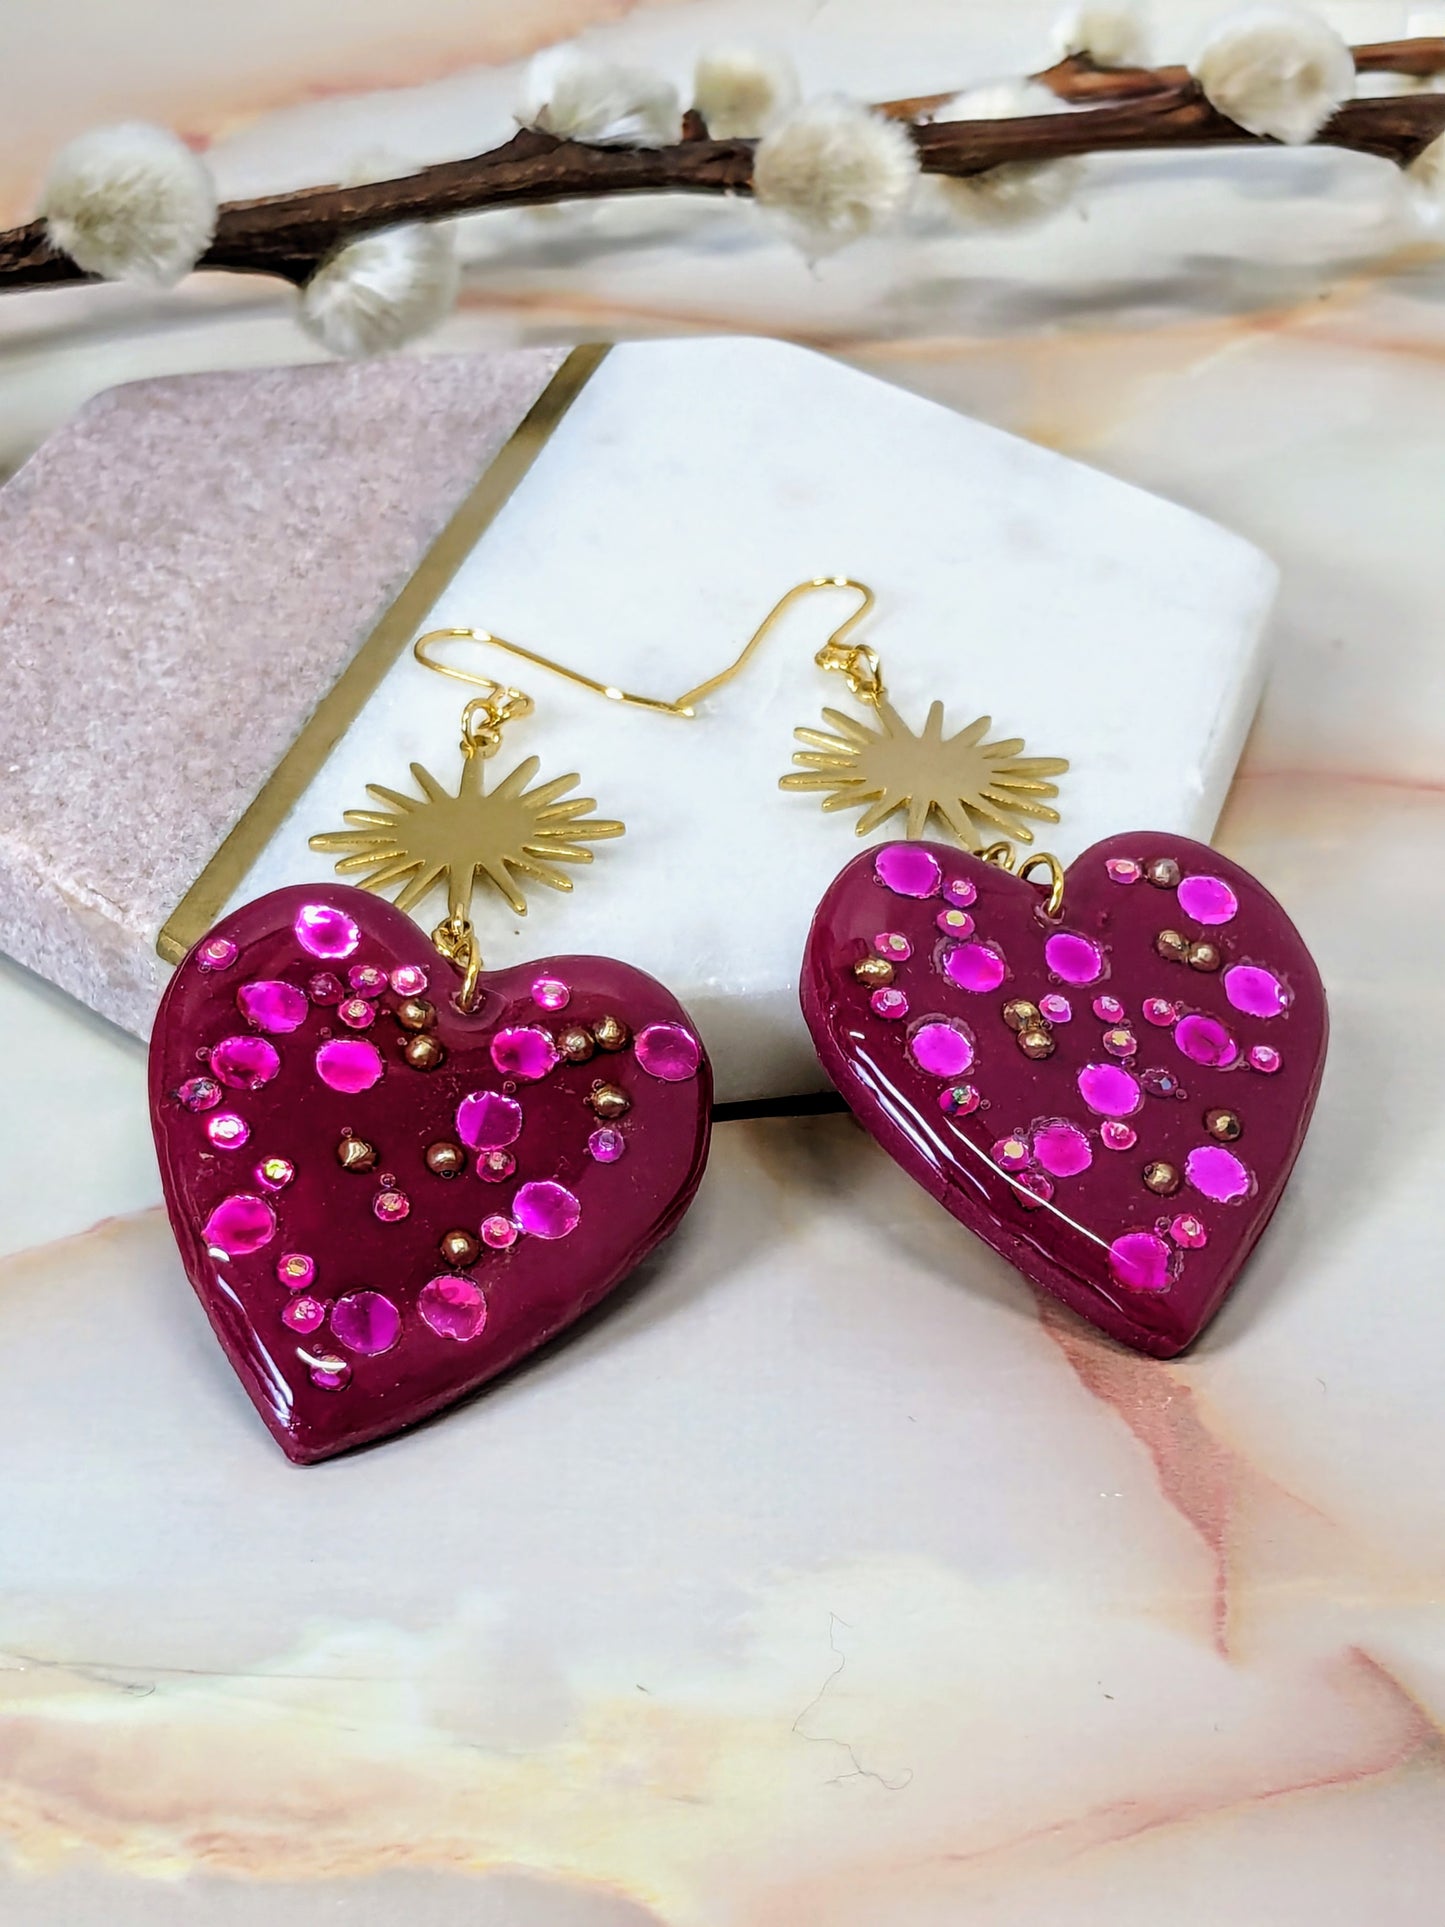 "Cordelia" Jewelled Polymer Clay Heart with Brass Sun Charm - Valentine's Collection